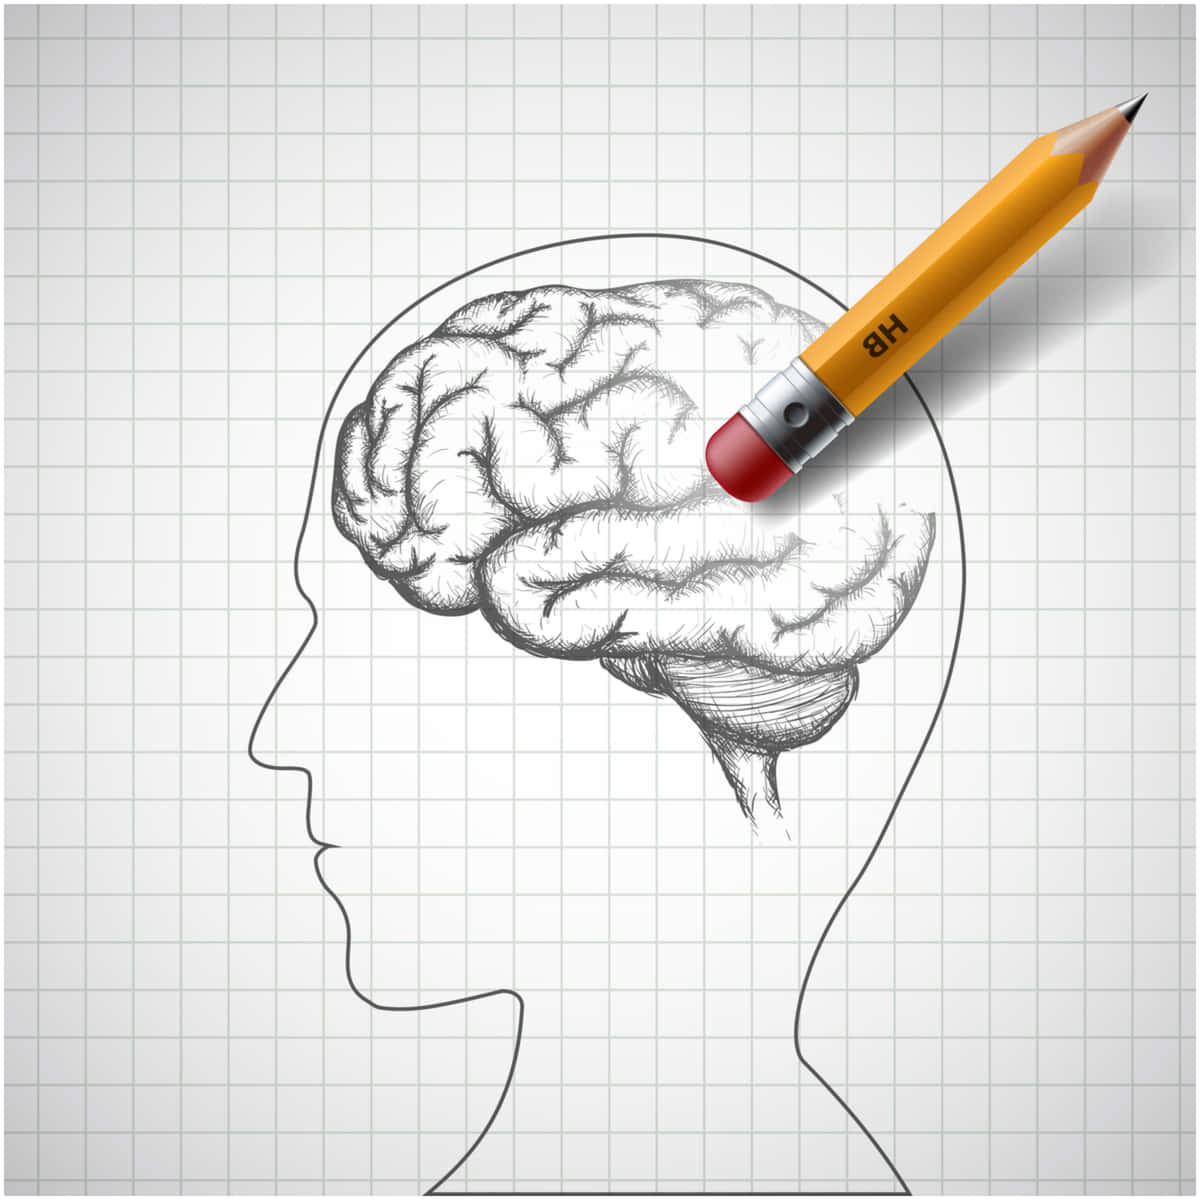 A Pencil Is Drawn On The Head Of A Human Brain